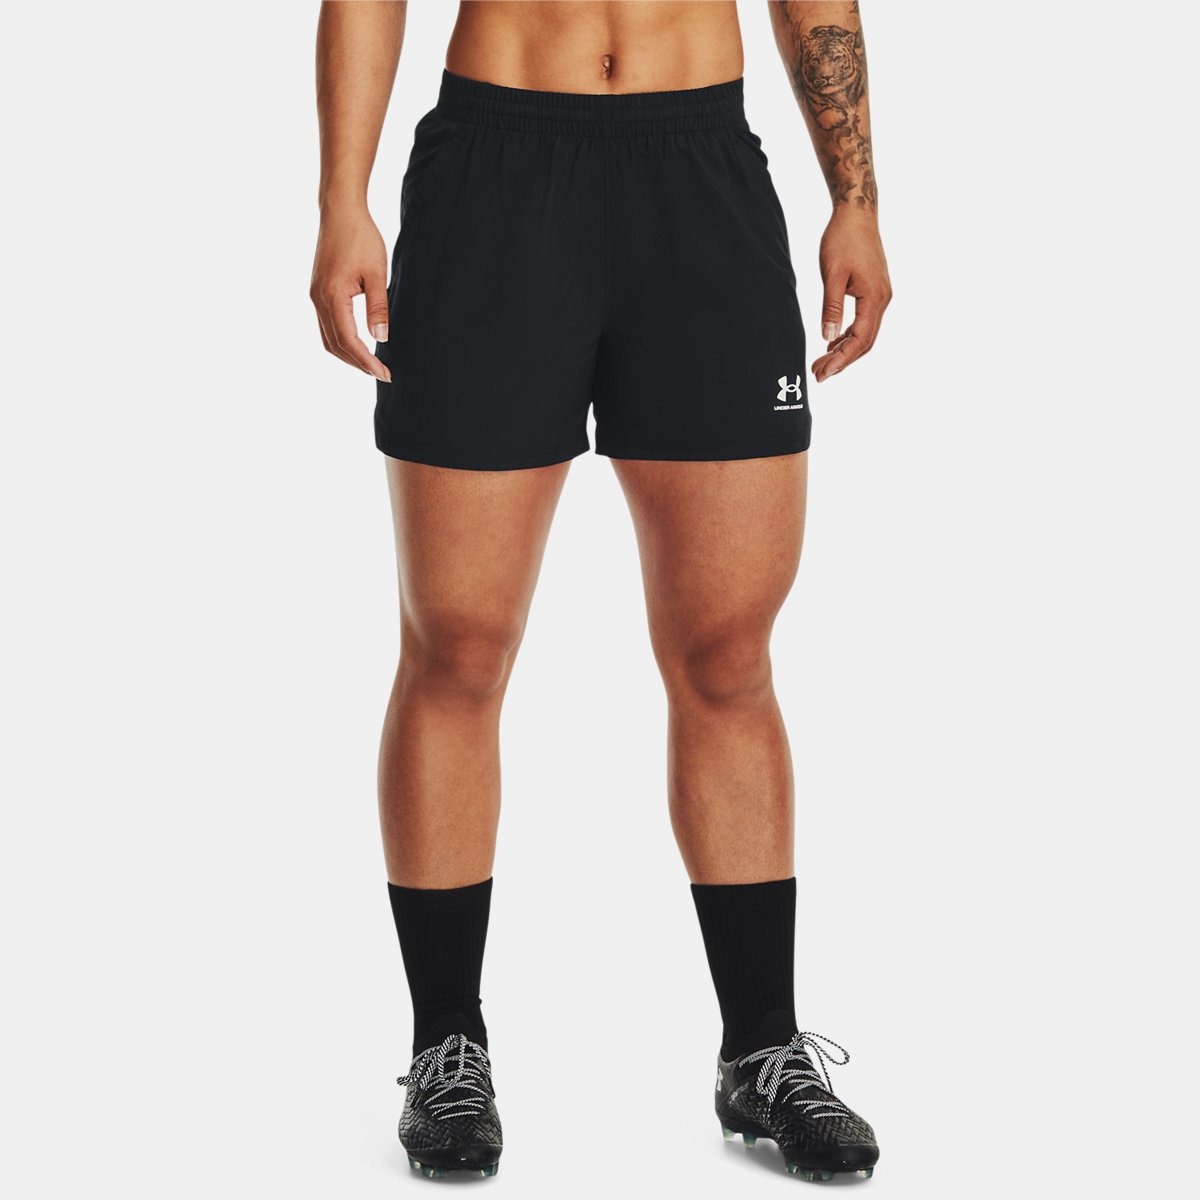 Shorts in Black for Women at Under Armour GOOFASH